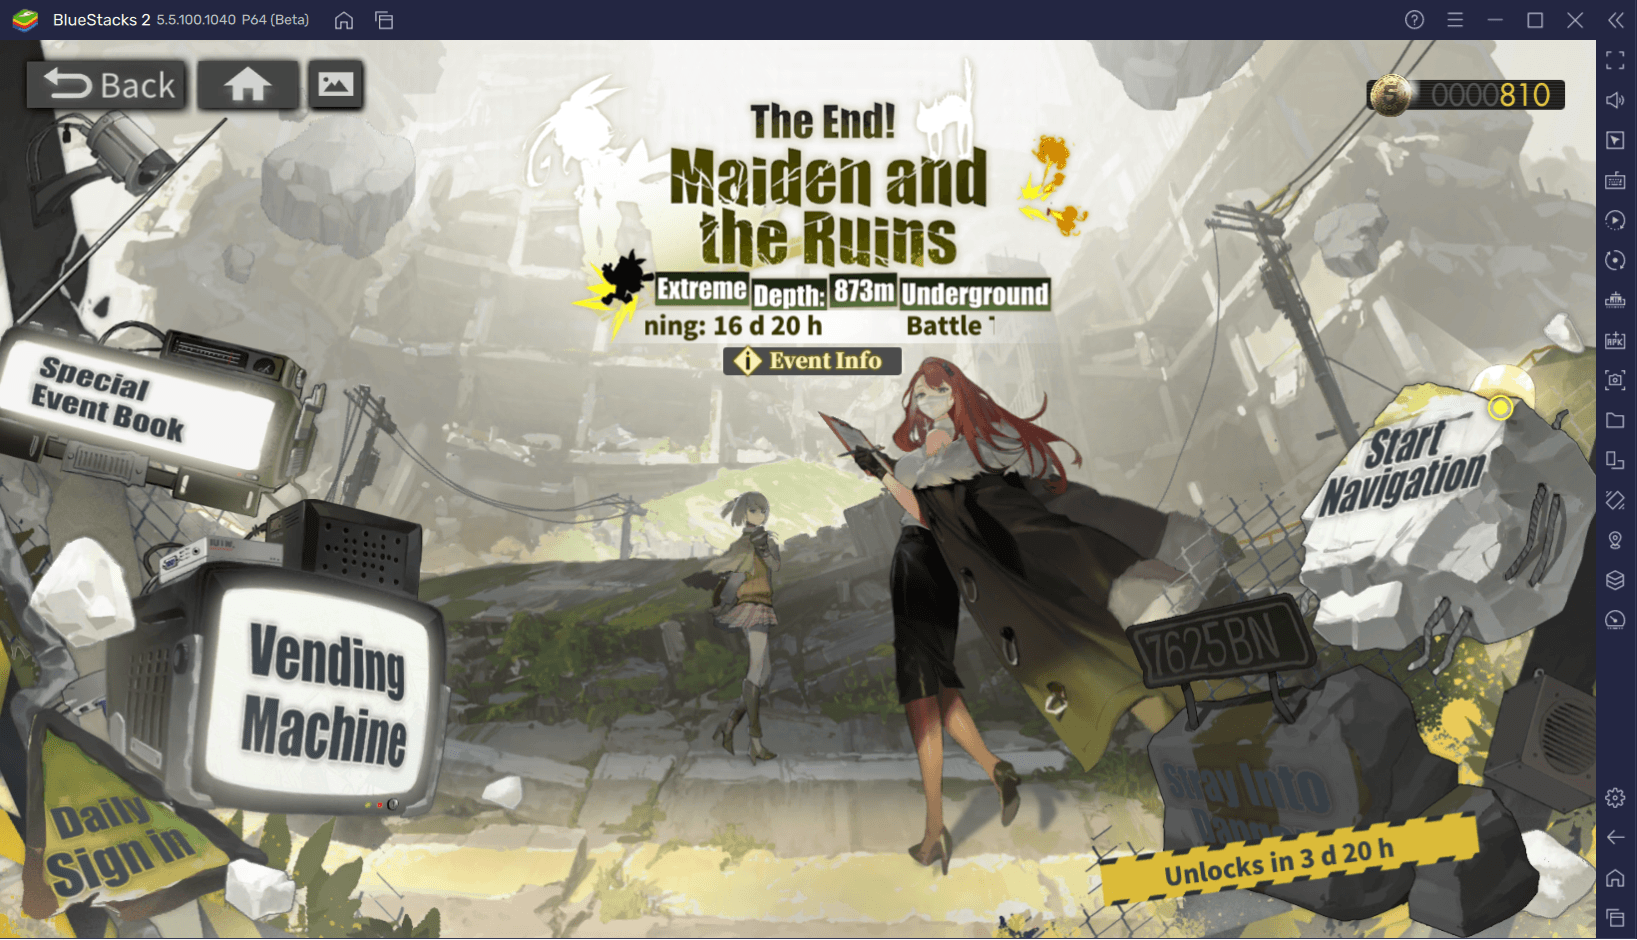 Alchemy Stars – The End! Maiden and the Ruins Extreme Depth: 873M Underground Event